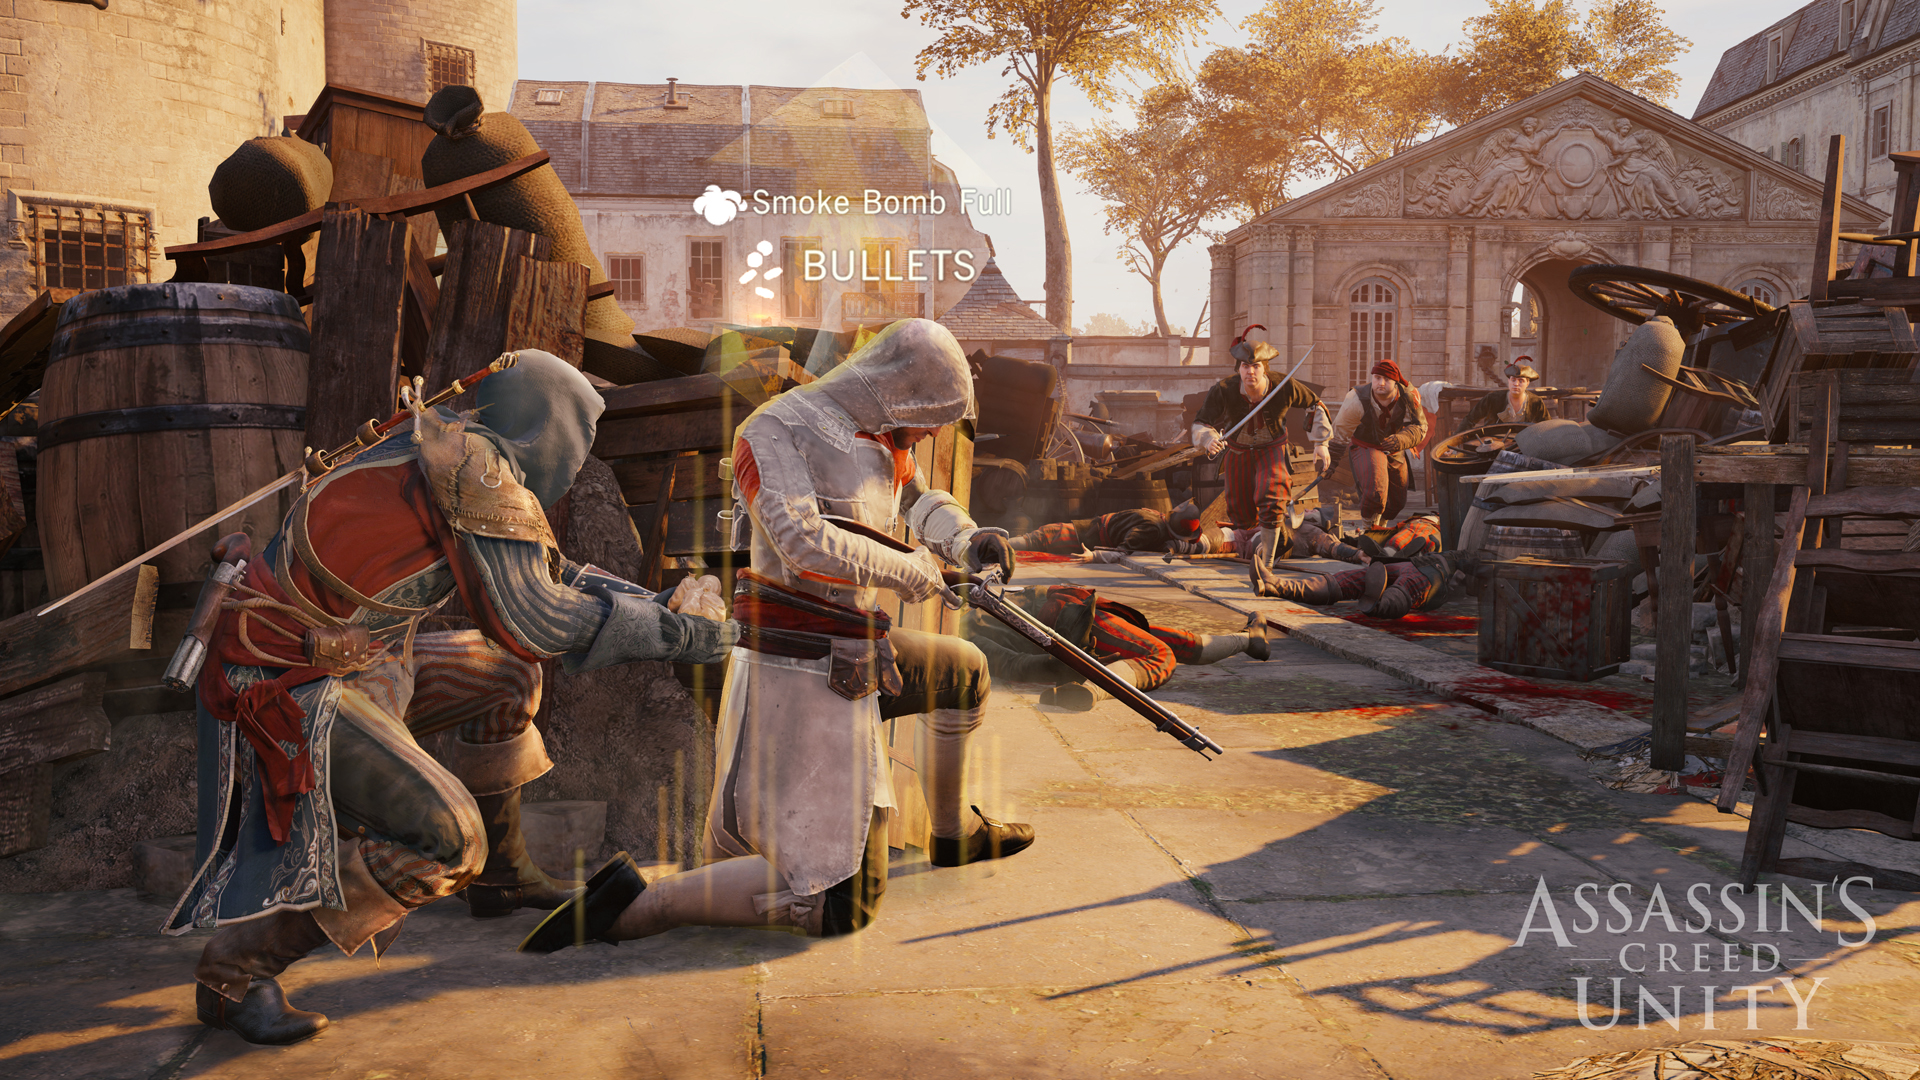 Assassin's Creed Unity Gallery #3